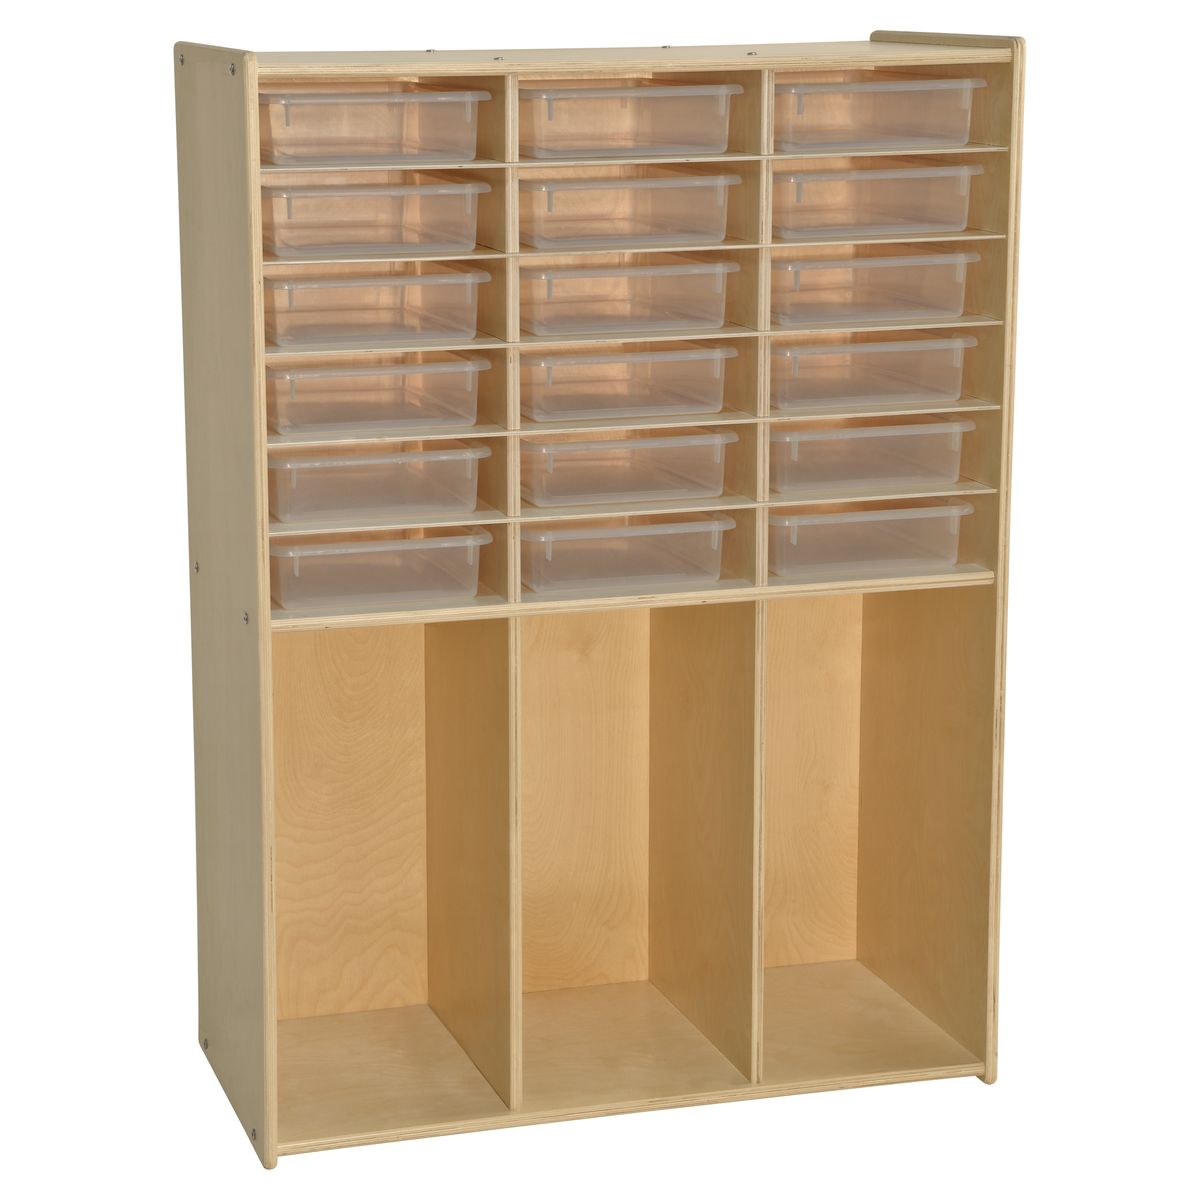 C990343f-ct 18 Translucent Tray Storage With Cubbies - Assembled